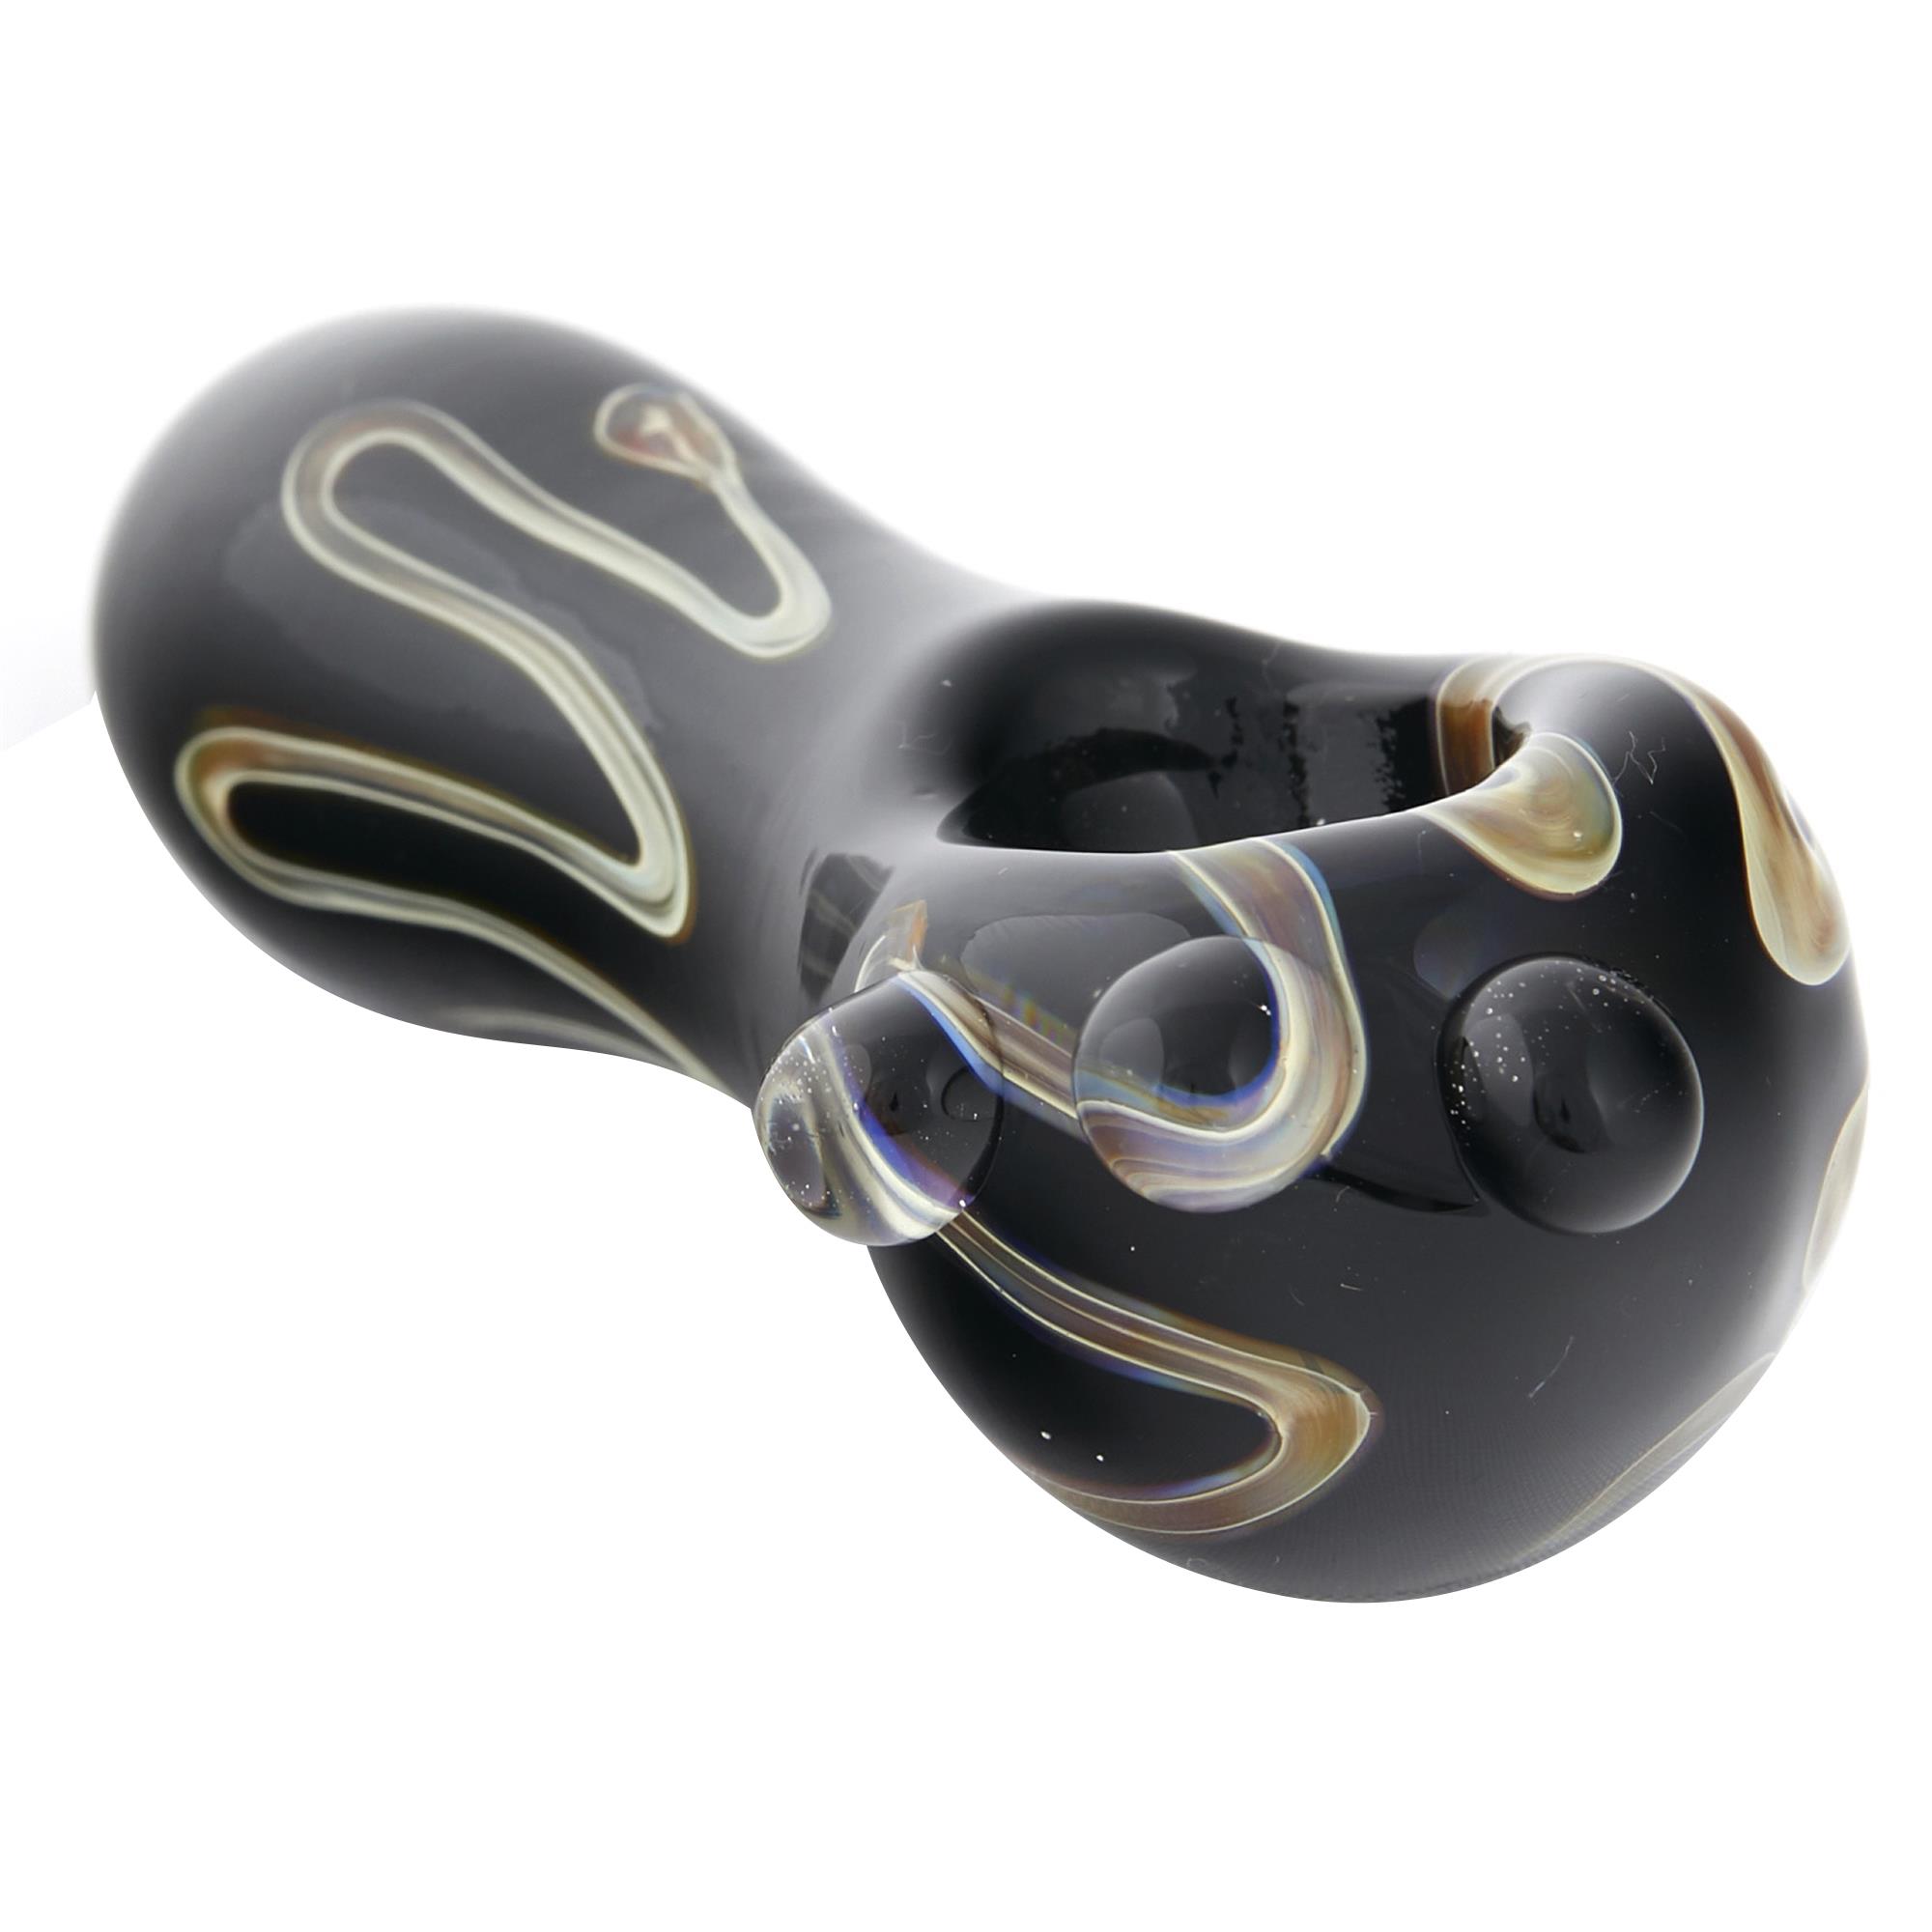 YOU ARE DOPE SPOON PIPE